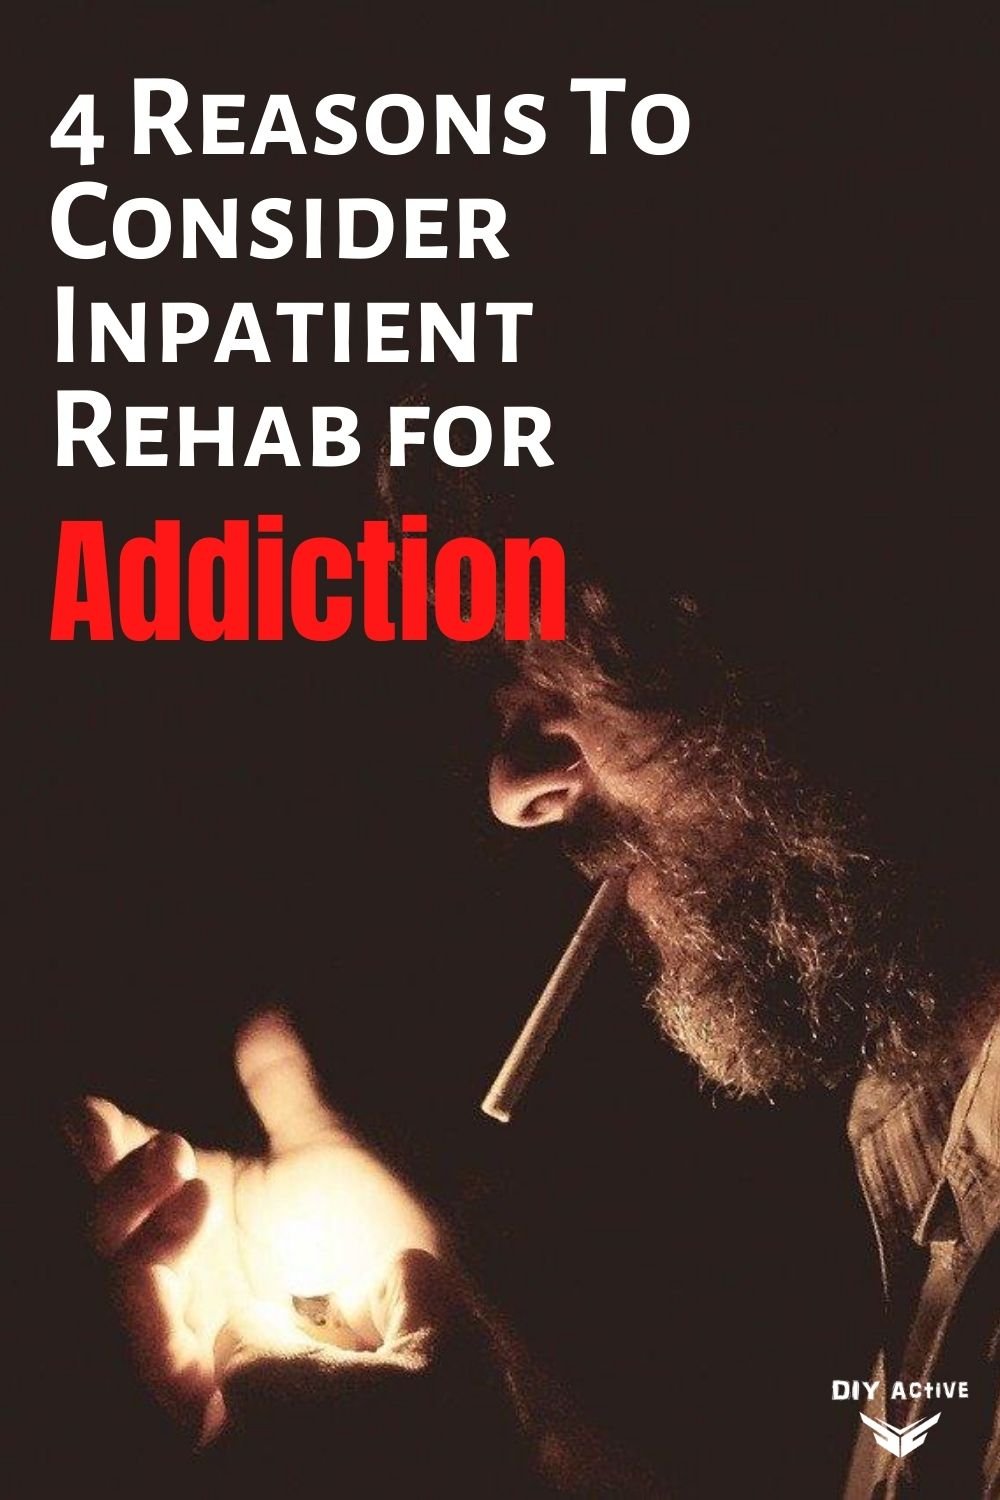 4 Reasons To Consider Inpatient Rehab for Addiction